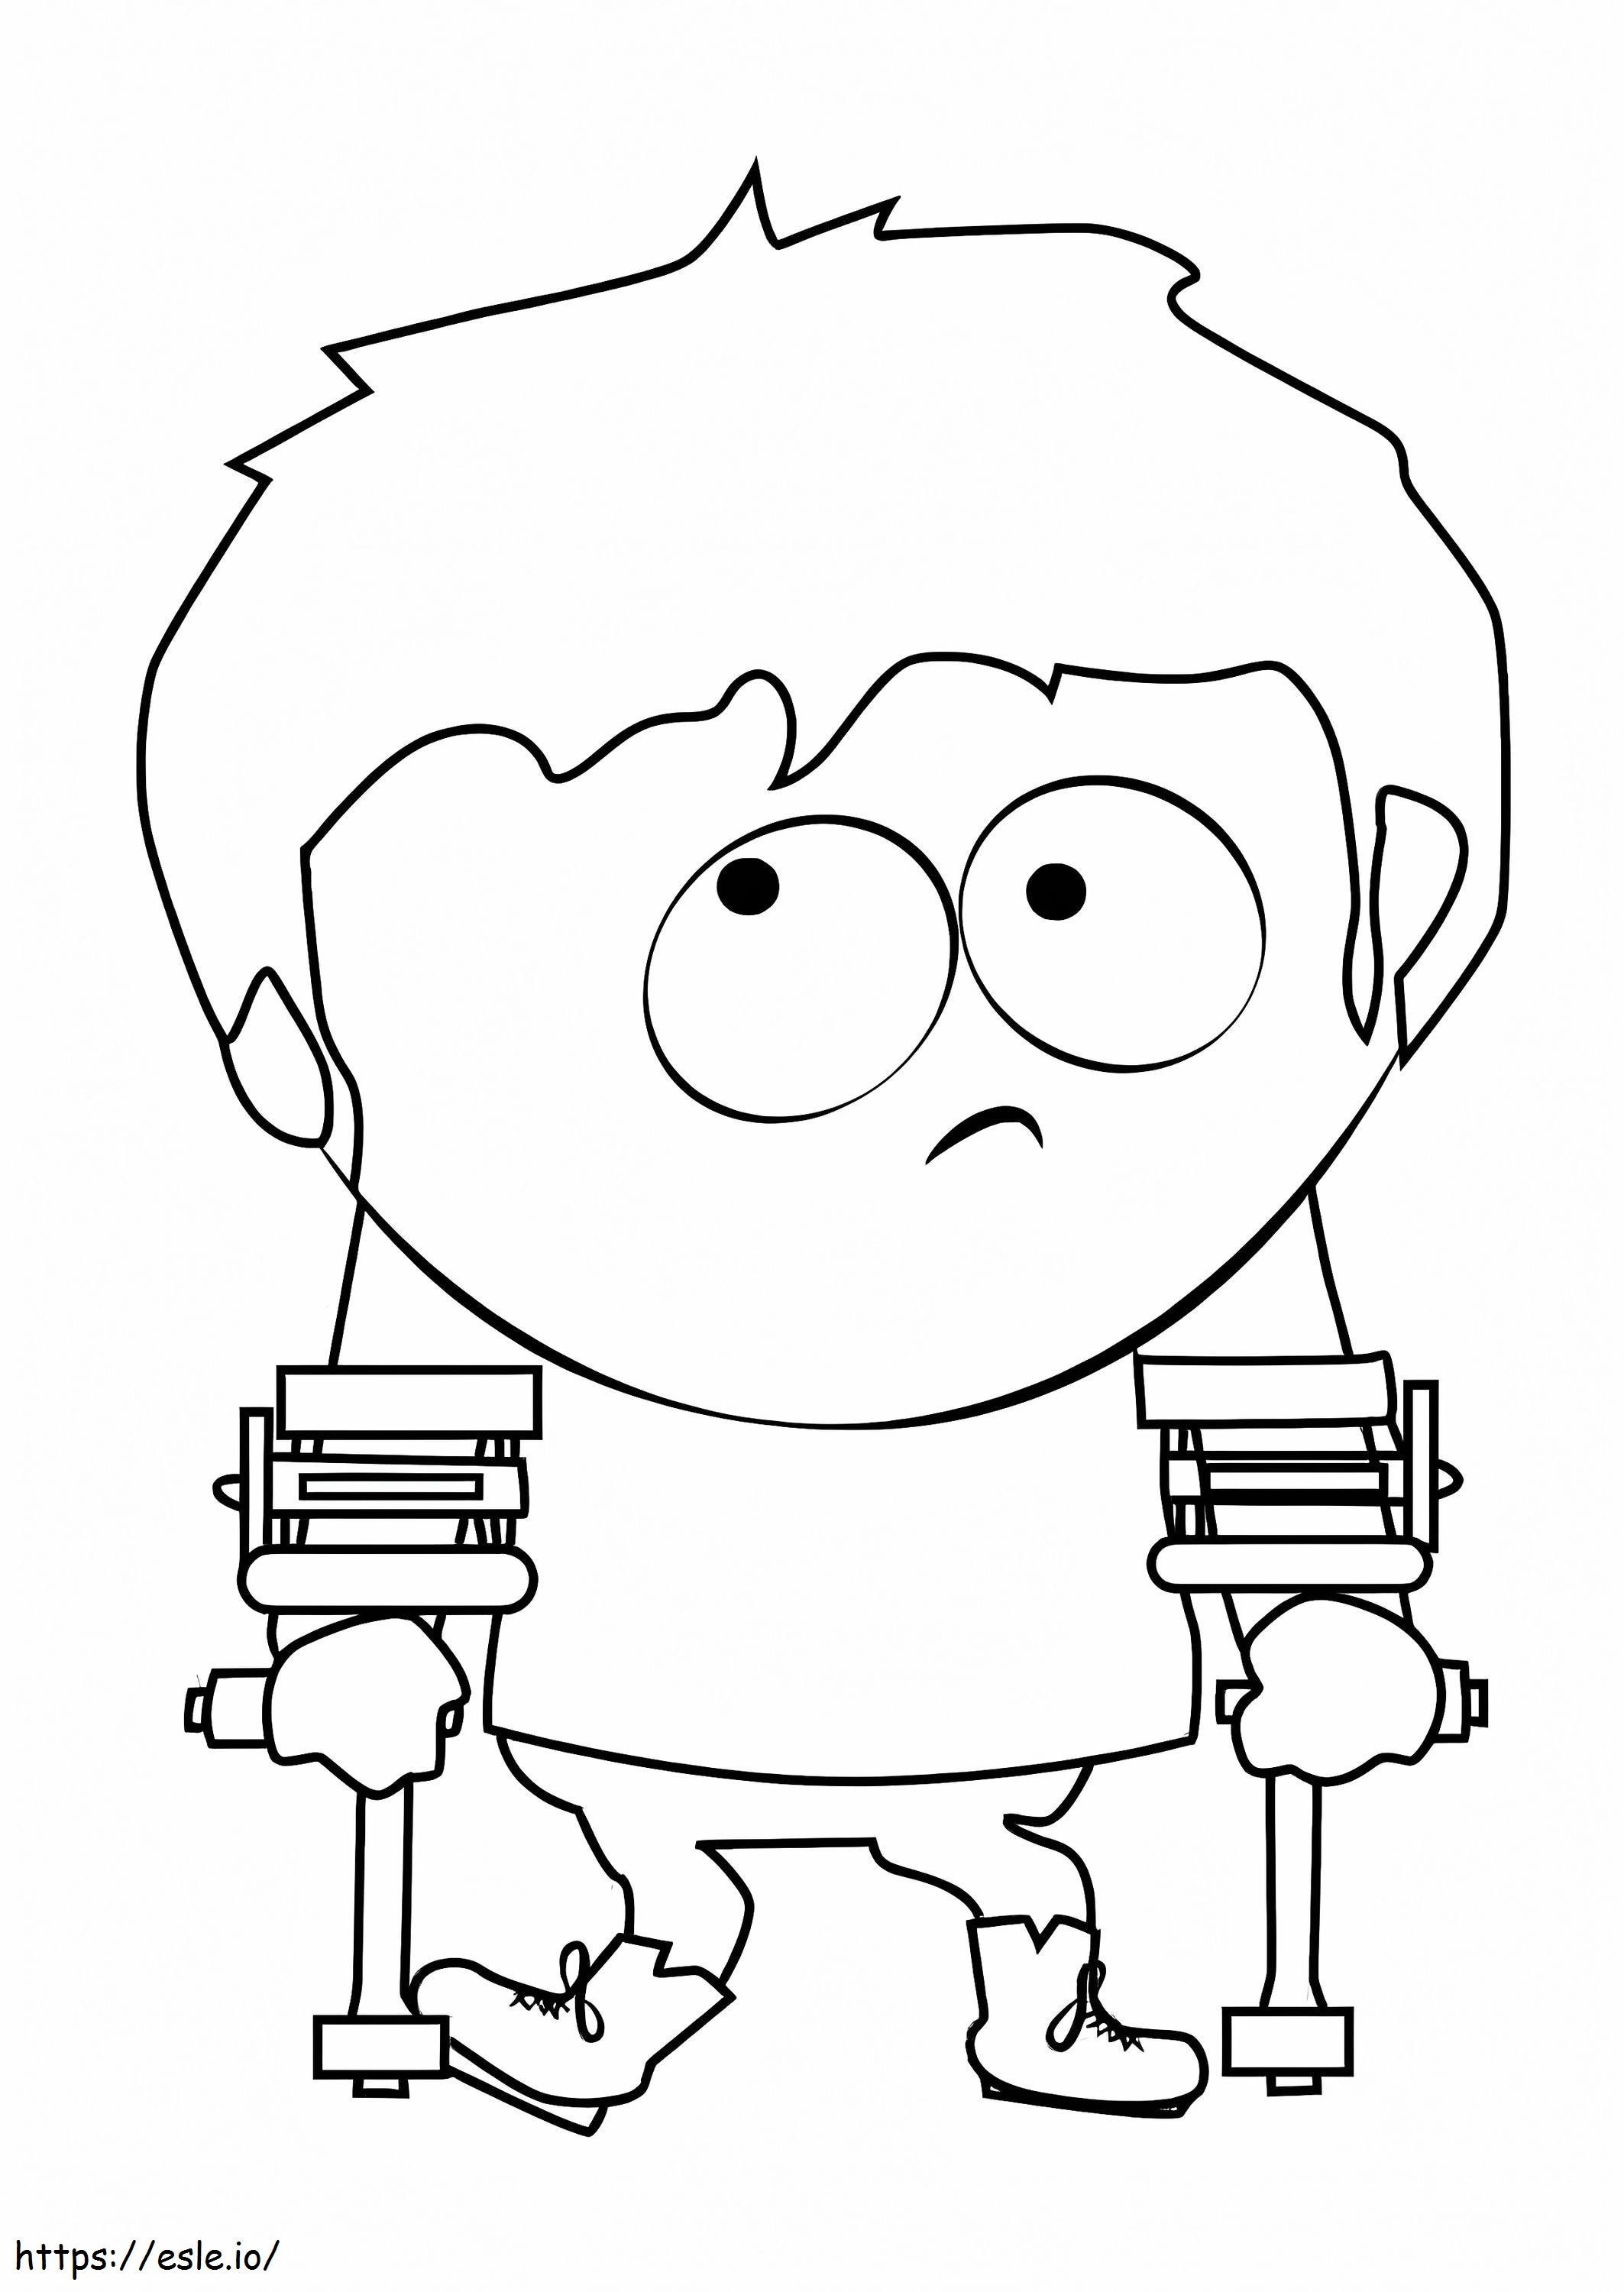 Jimmy Valmer From South Park coloring page